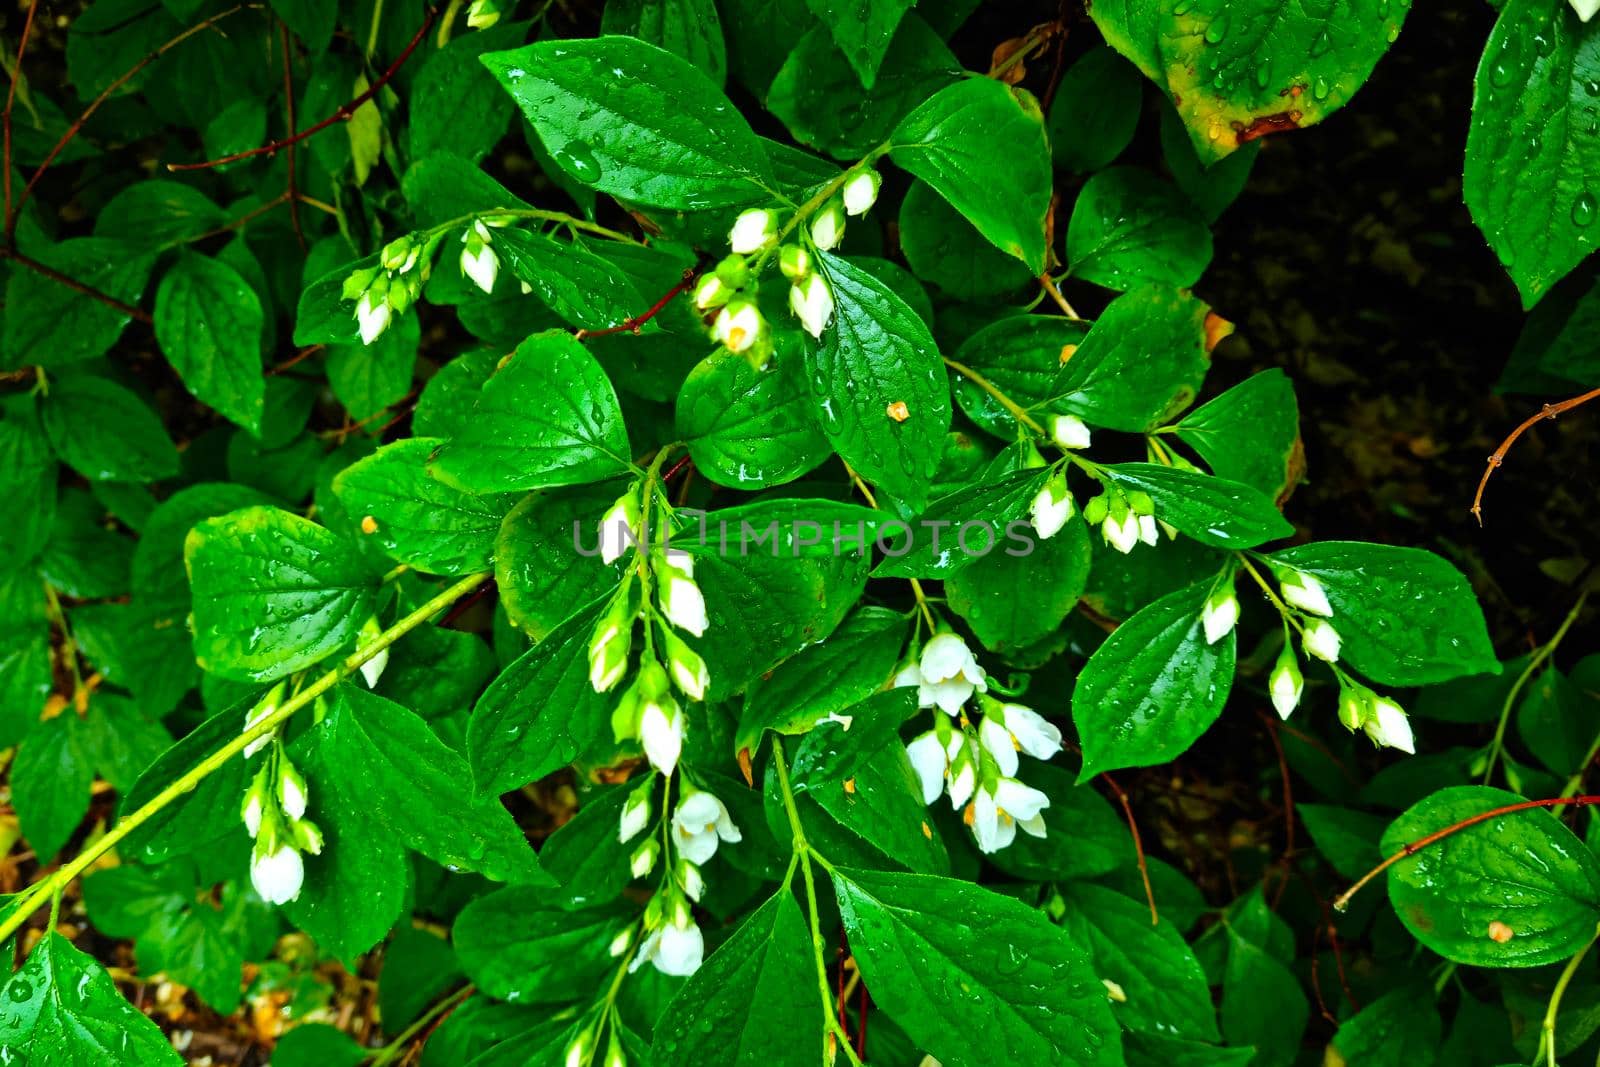 A flowering bush in the park after the rain. Drops of water on the foliage. by kip02kas